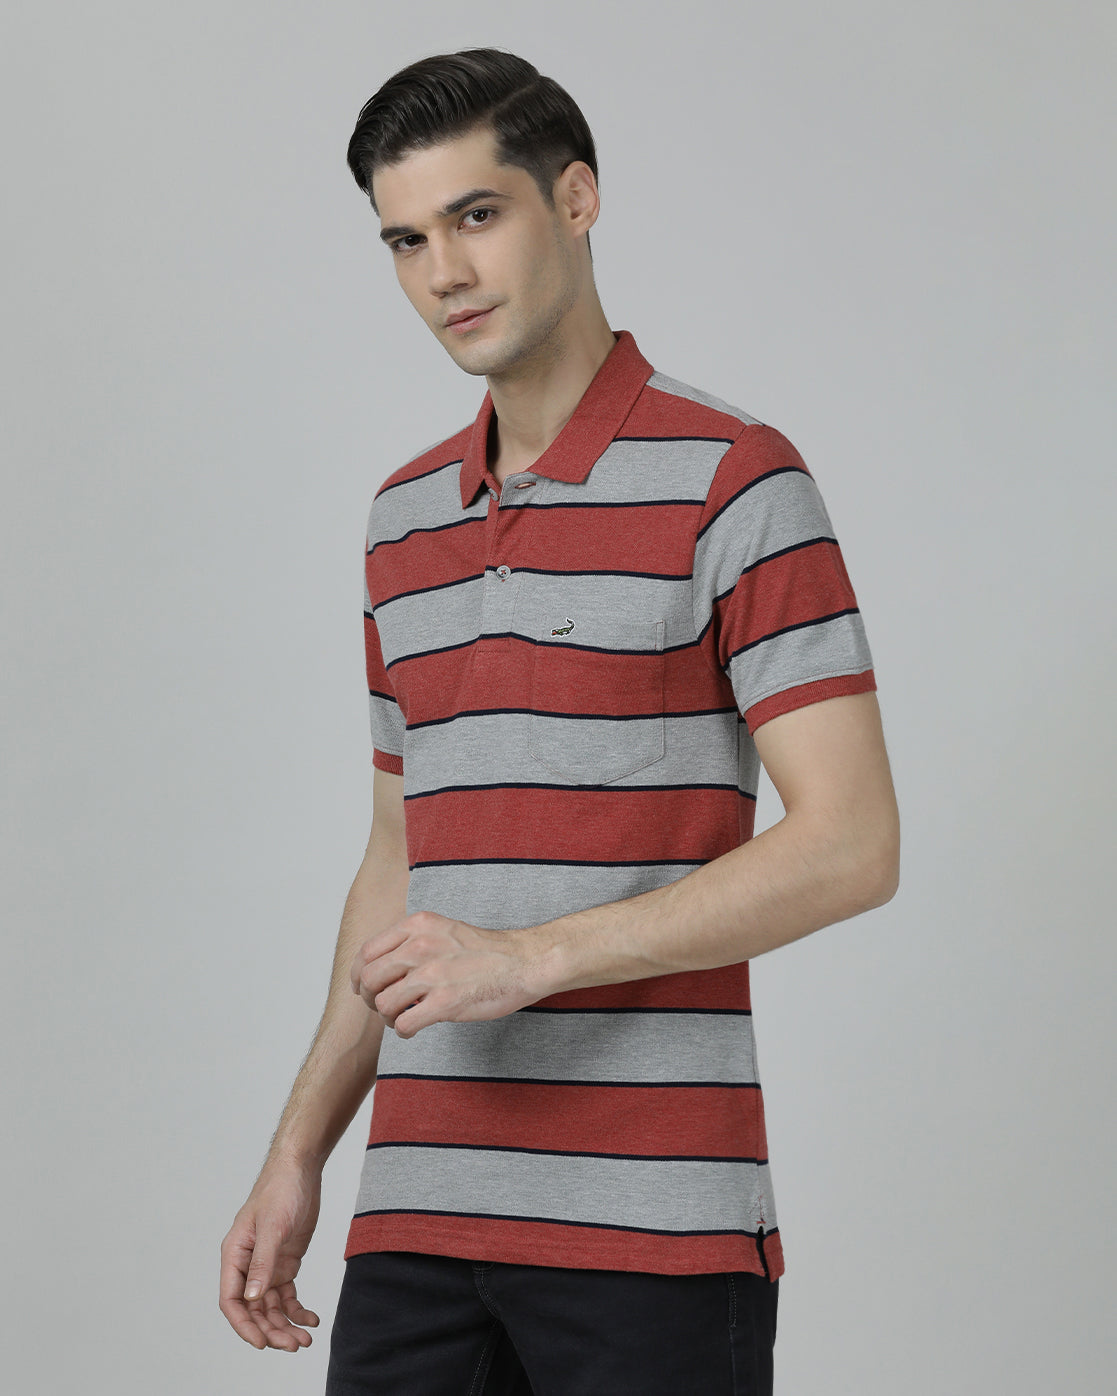 Casual Stripes Slim Fit Red Half Sleeve Polo T-shirt with Collar